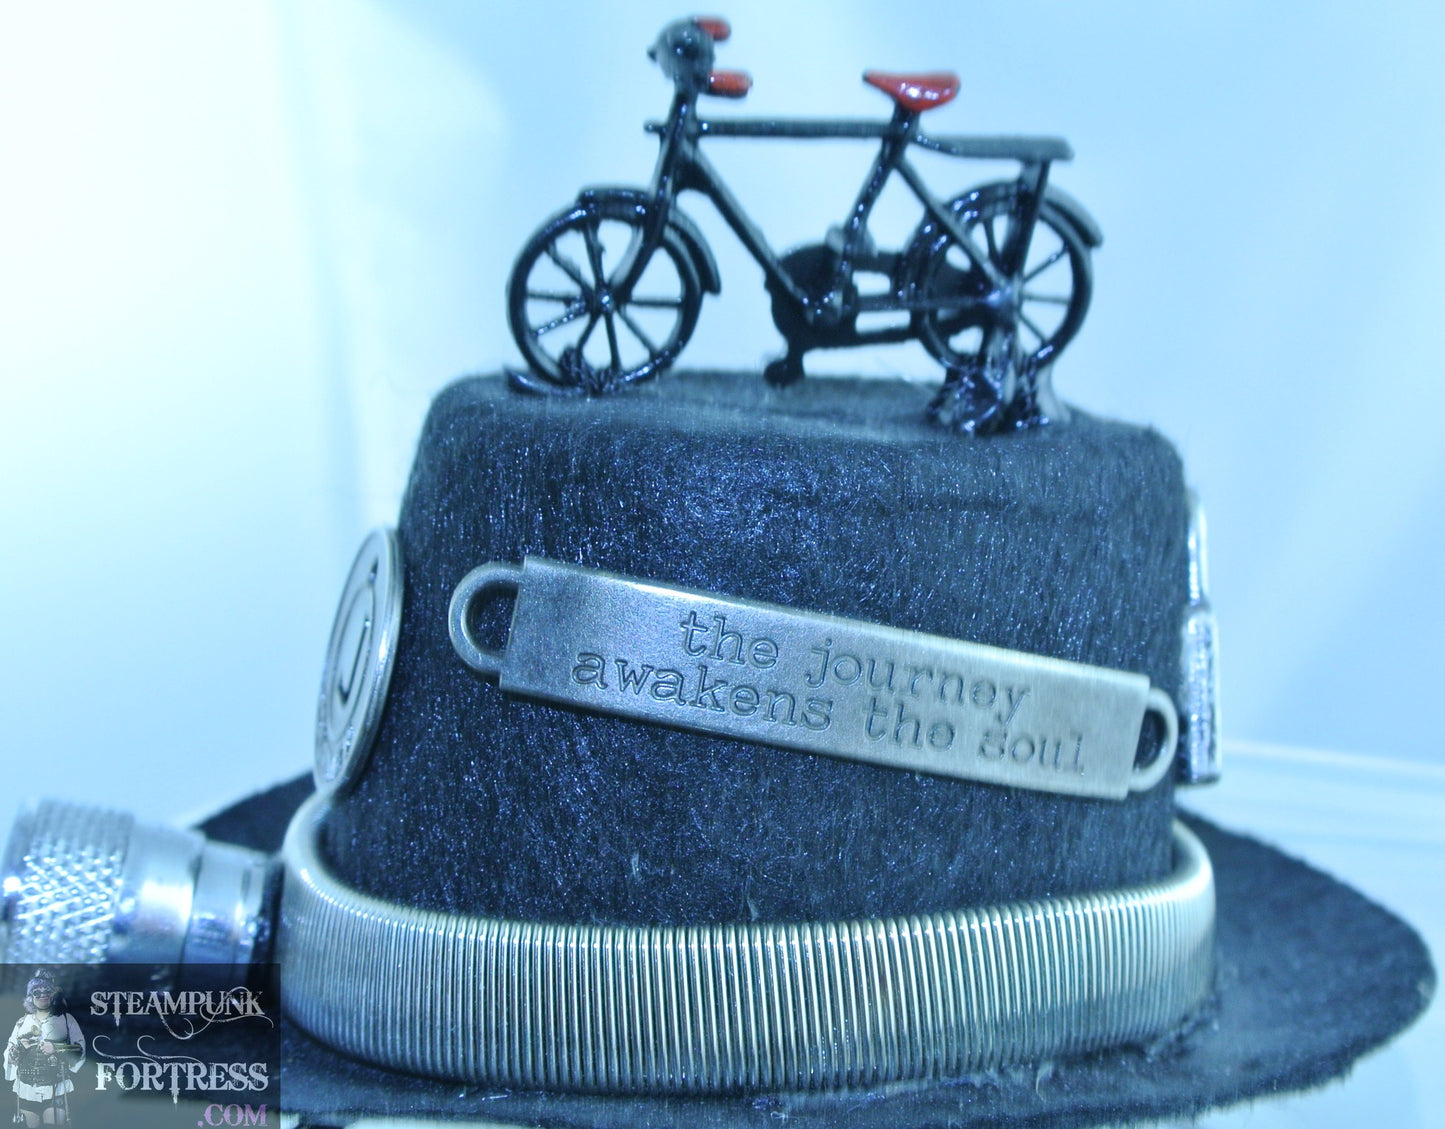 BLACK SILVER LOCK KEY WORD STICK JOURNEY TOKEN WINGS BICYCLE TOP HEAD LIGHT SILVER STRETCH BAND XS EXTRA SMALL MINI TOP HAT STARR WILDE STEAMPUNK FORTRESS